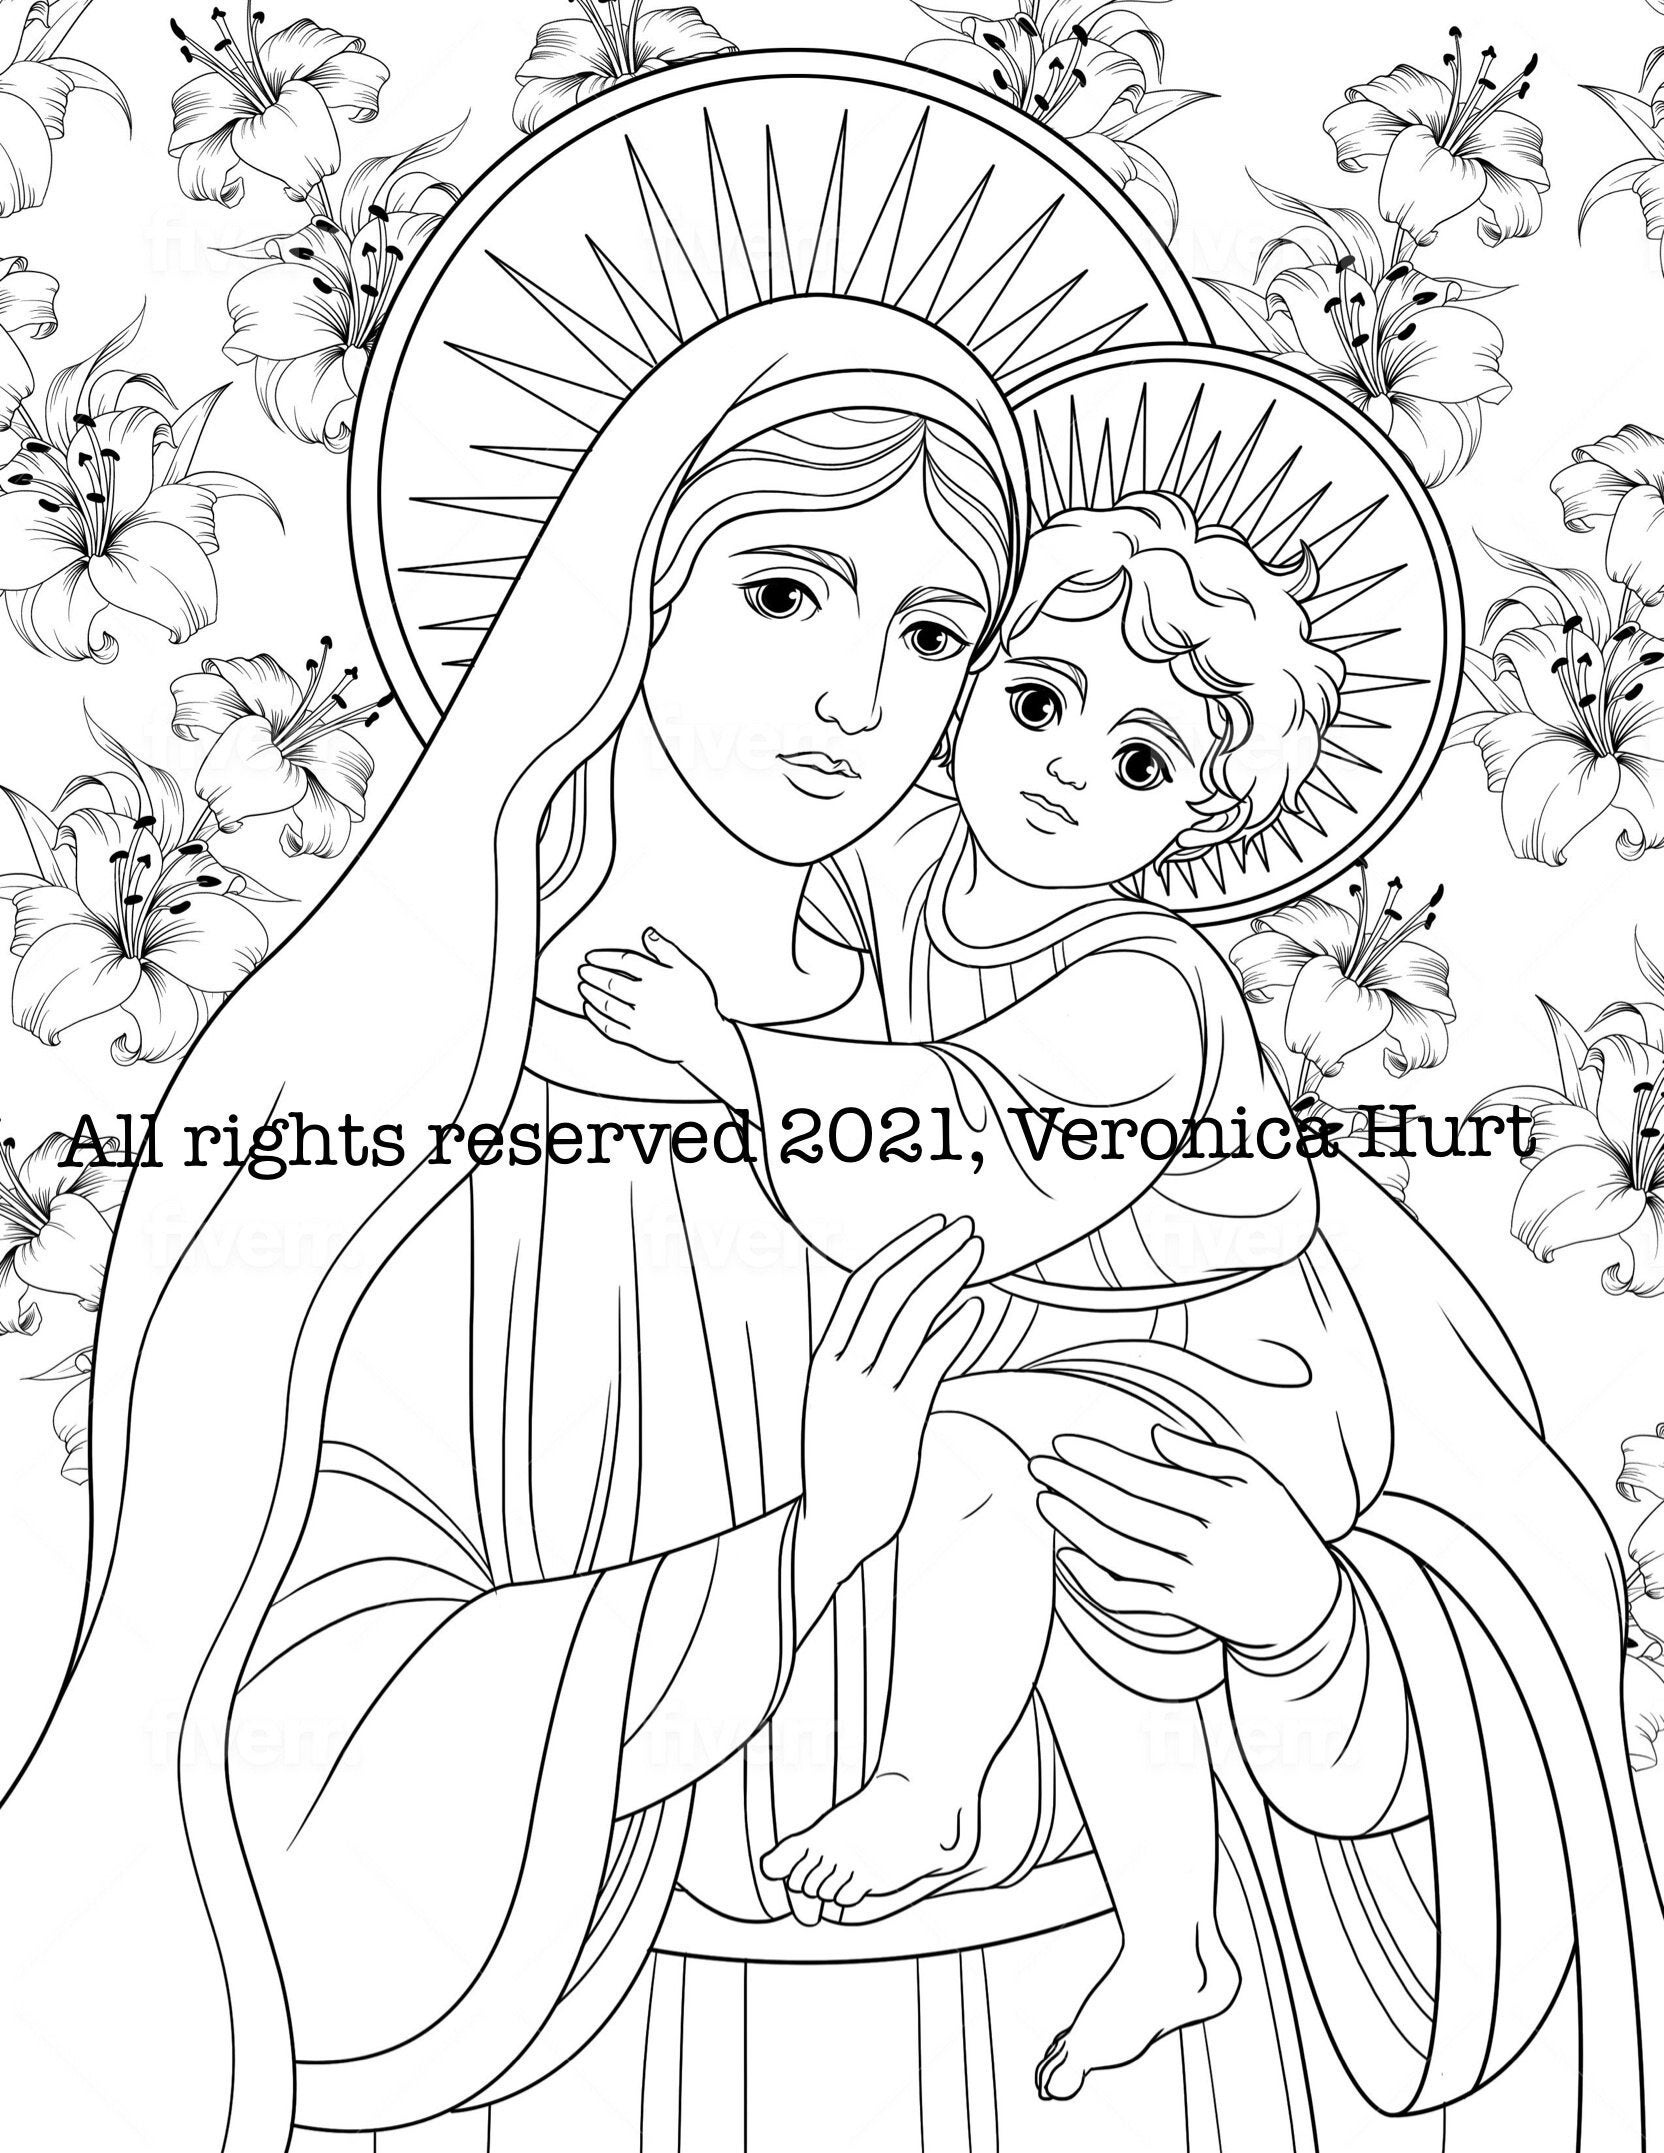 Solemnity of Mary Mother of God Coloring Page Saint Mary | Etsy